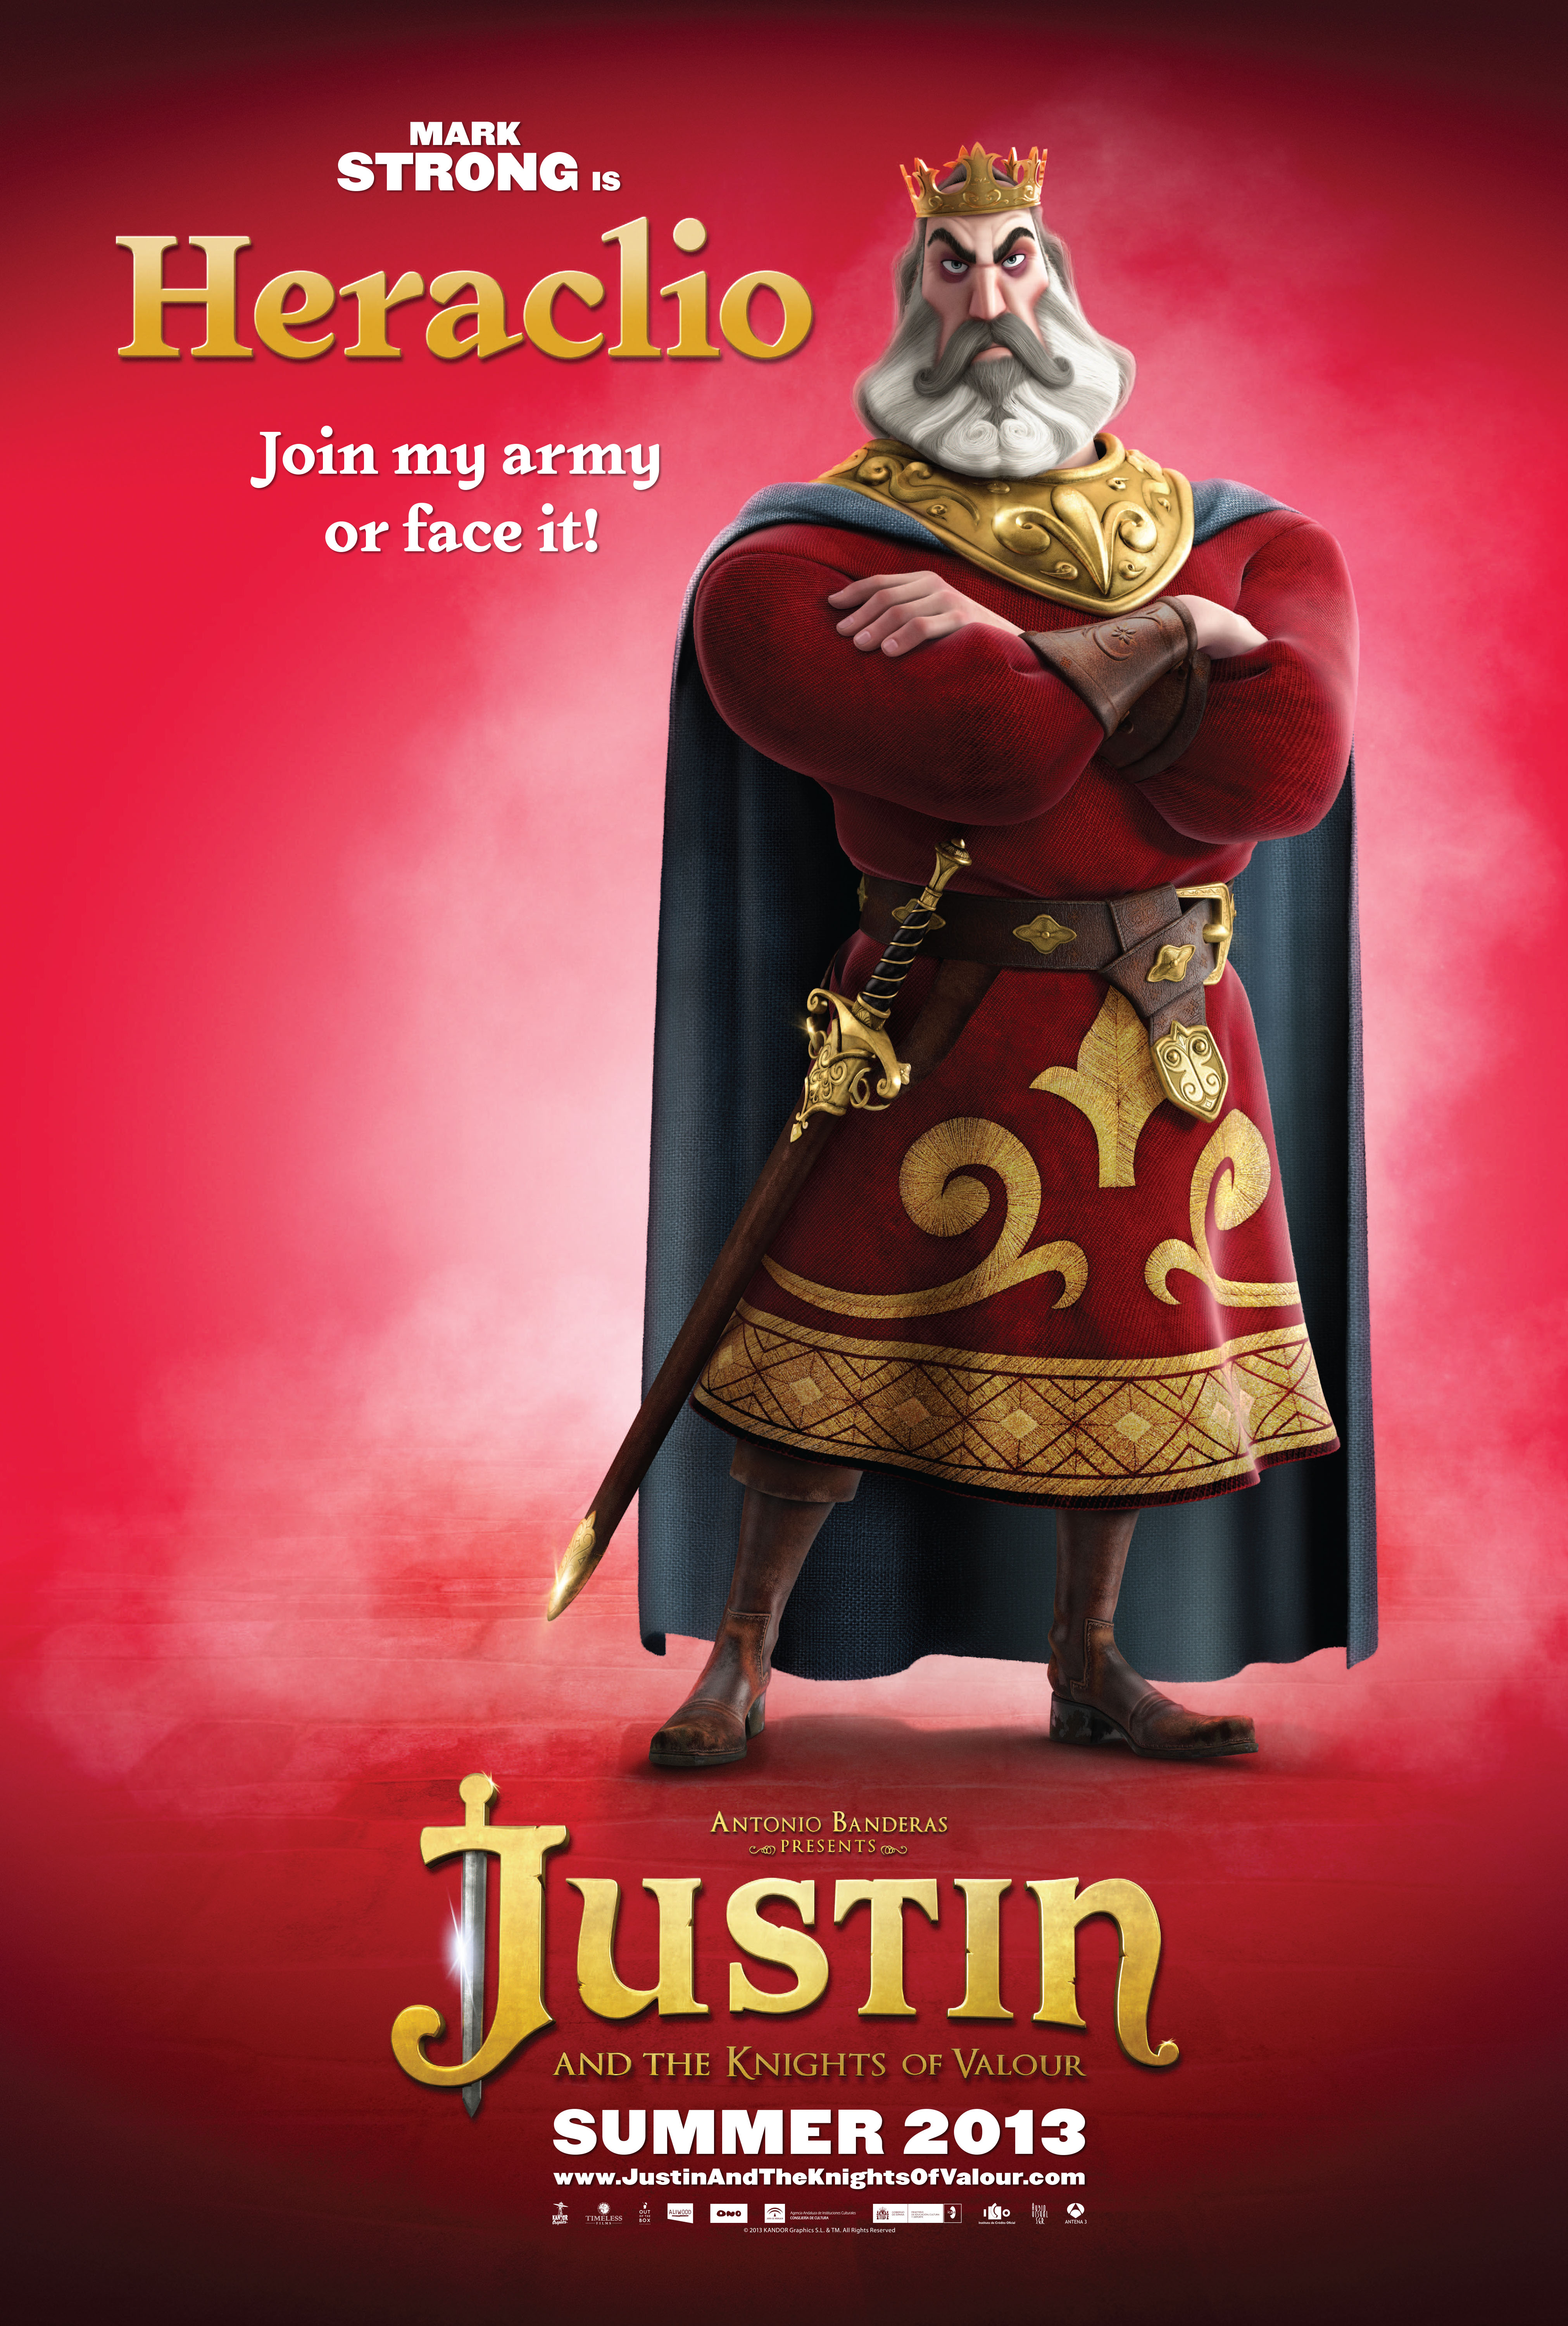 Images of Justin And The Knights Of Valour | 4045x6000